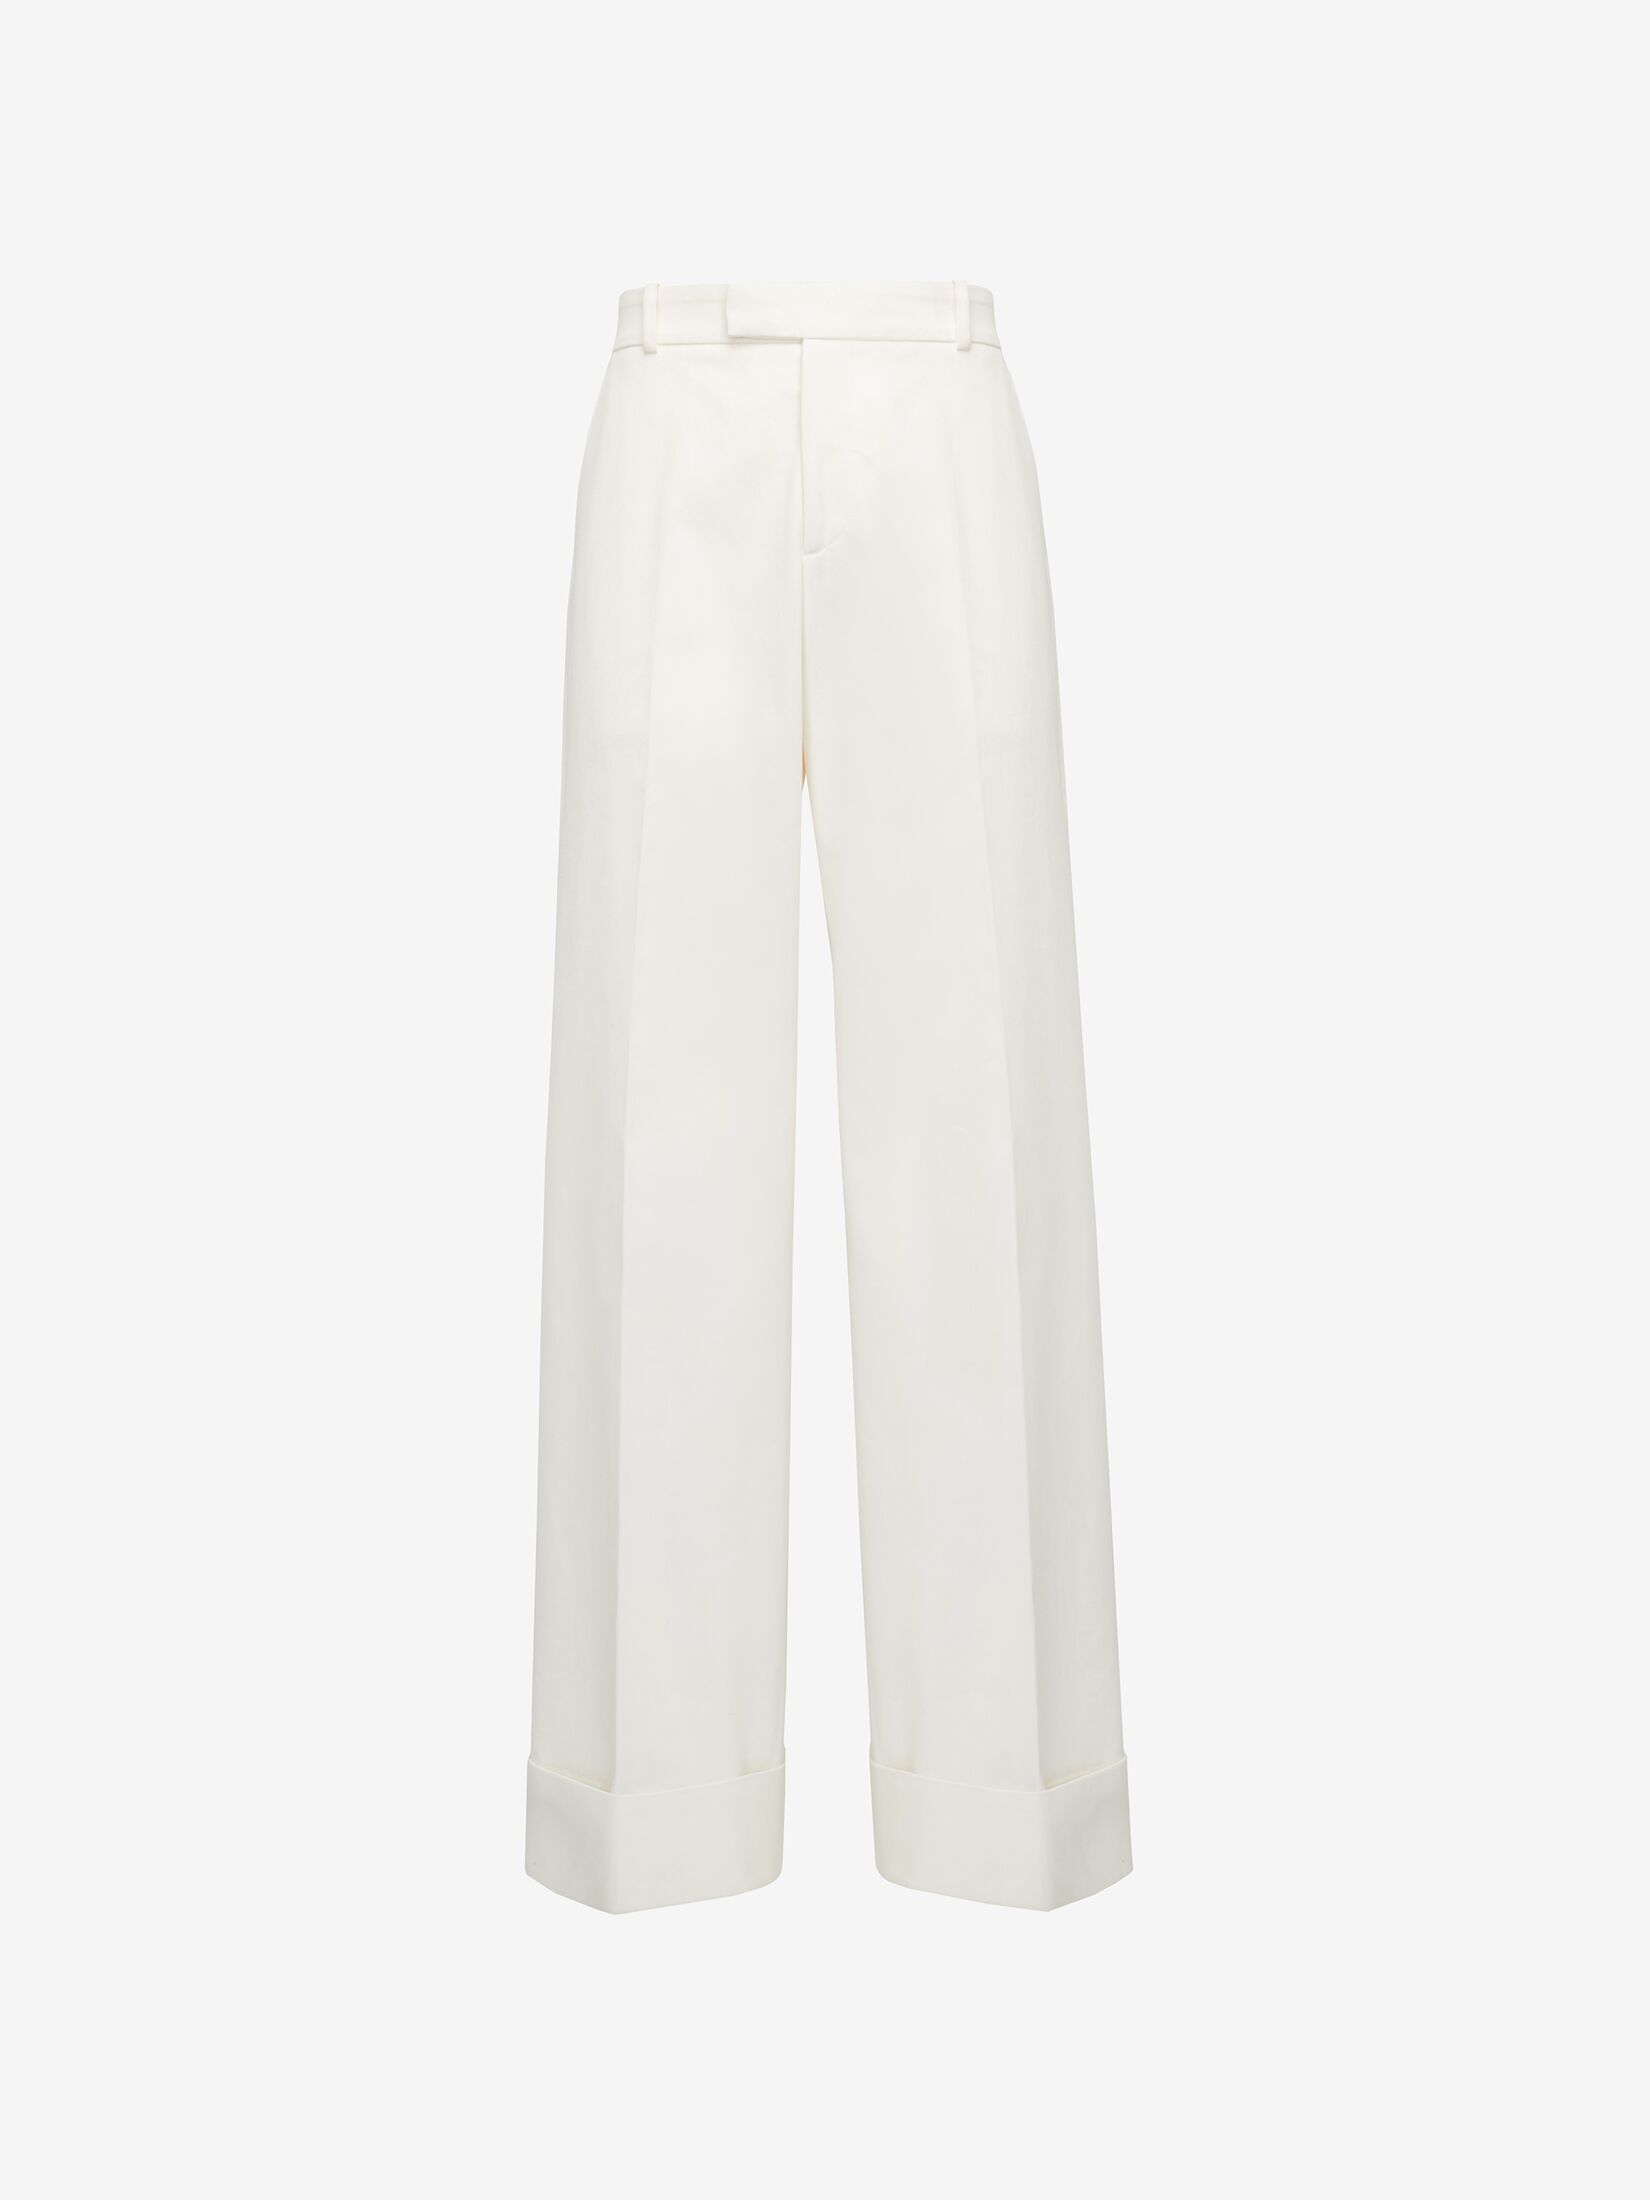 Fashion Edit: How to get the baggy trousers trend - High Life North